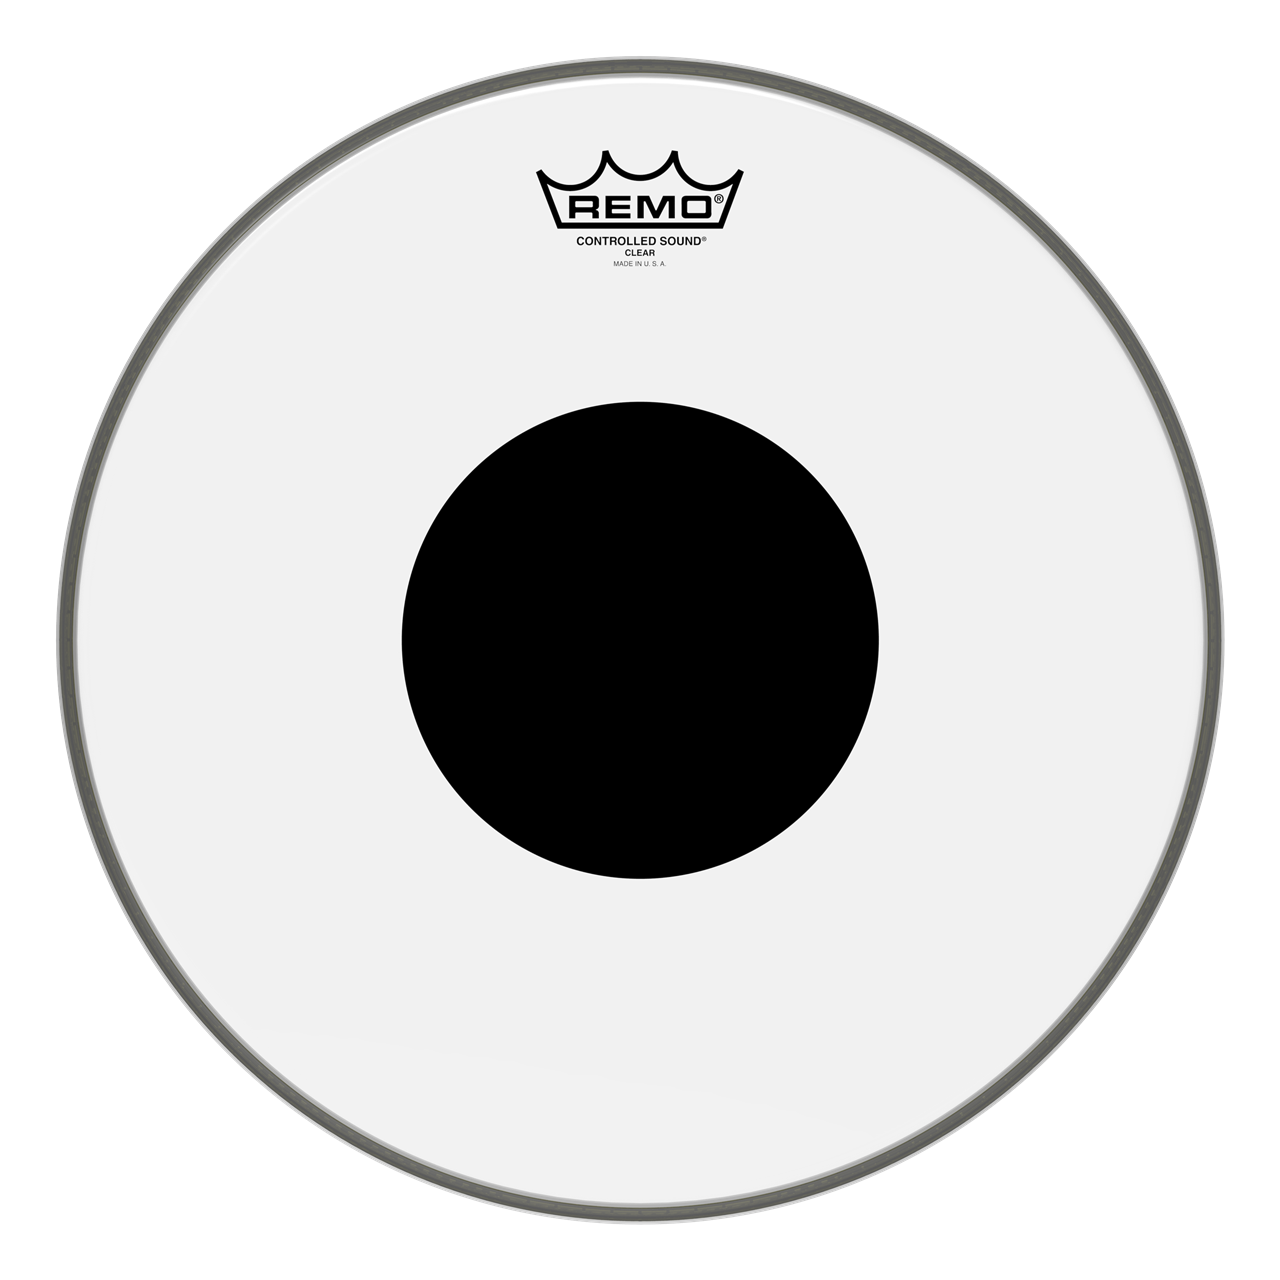 Remo CS-0312-10 Controlled Sound, 12" Clear, Black Dot